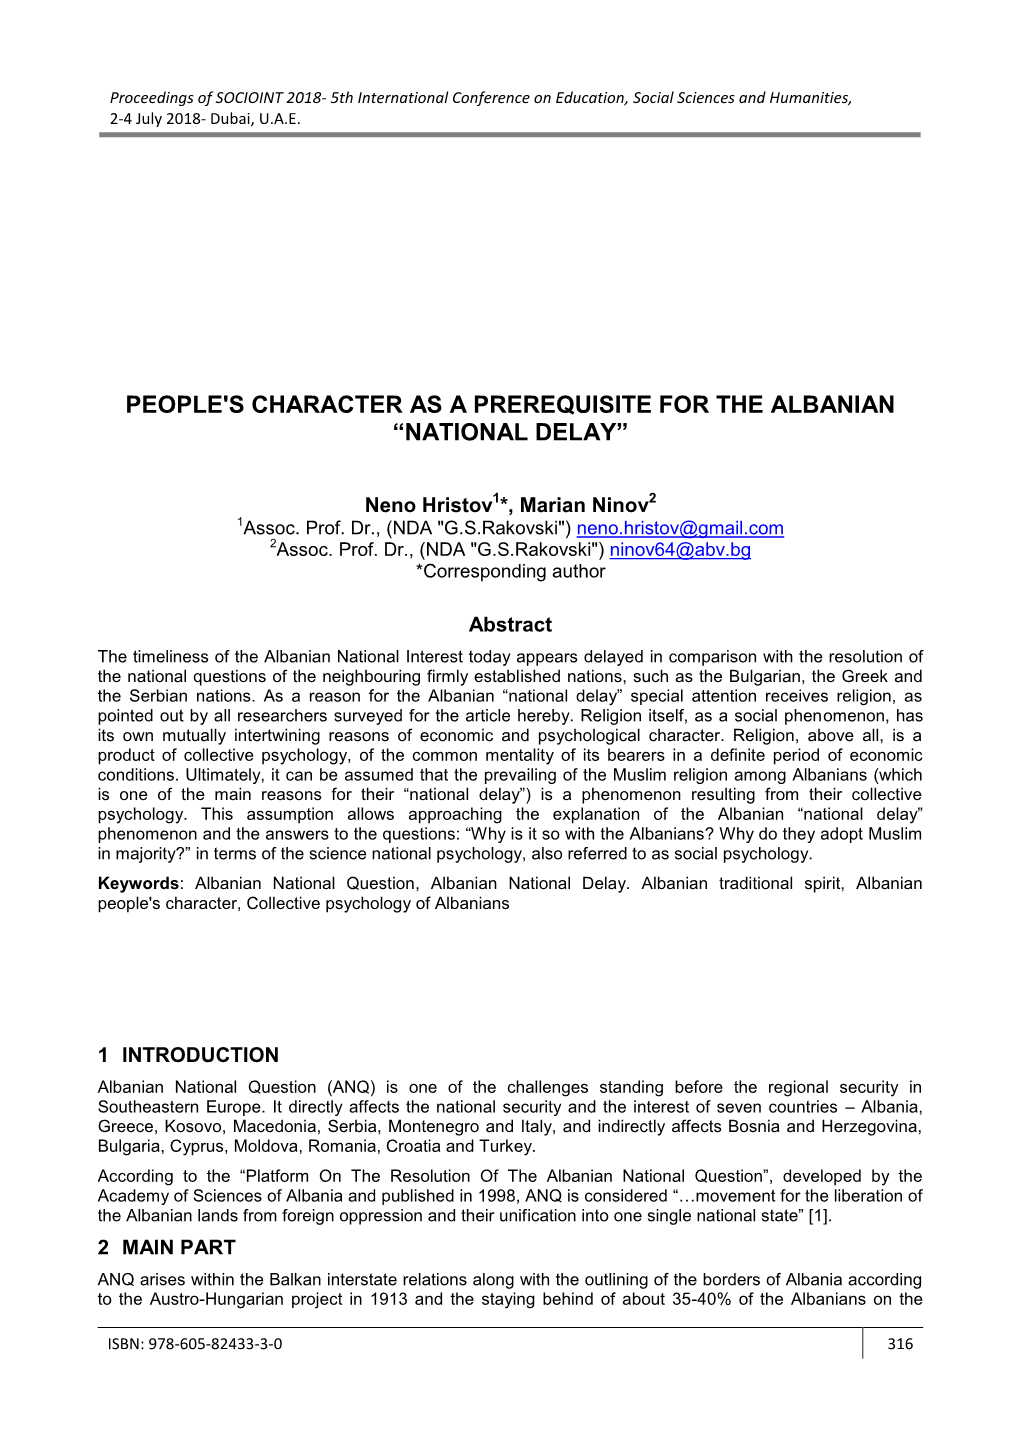 People's Character As a Prerequisite for the Albanian “National Delay”